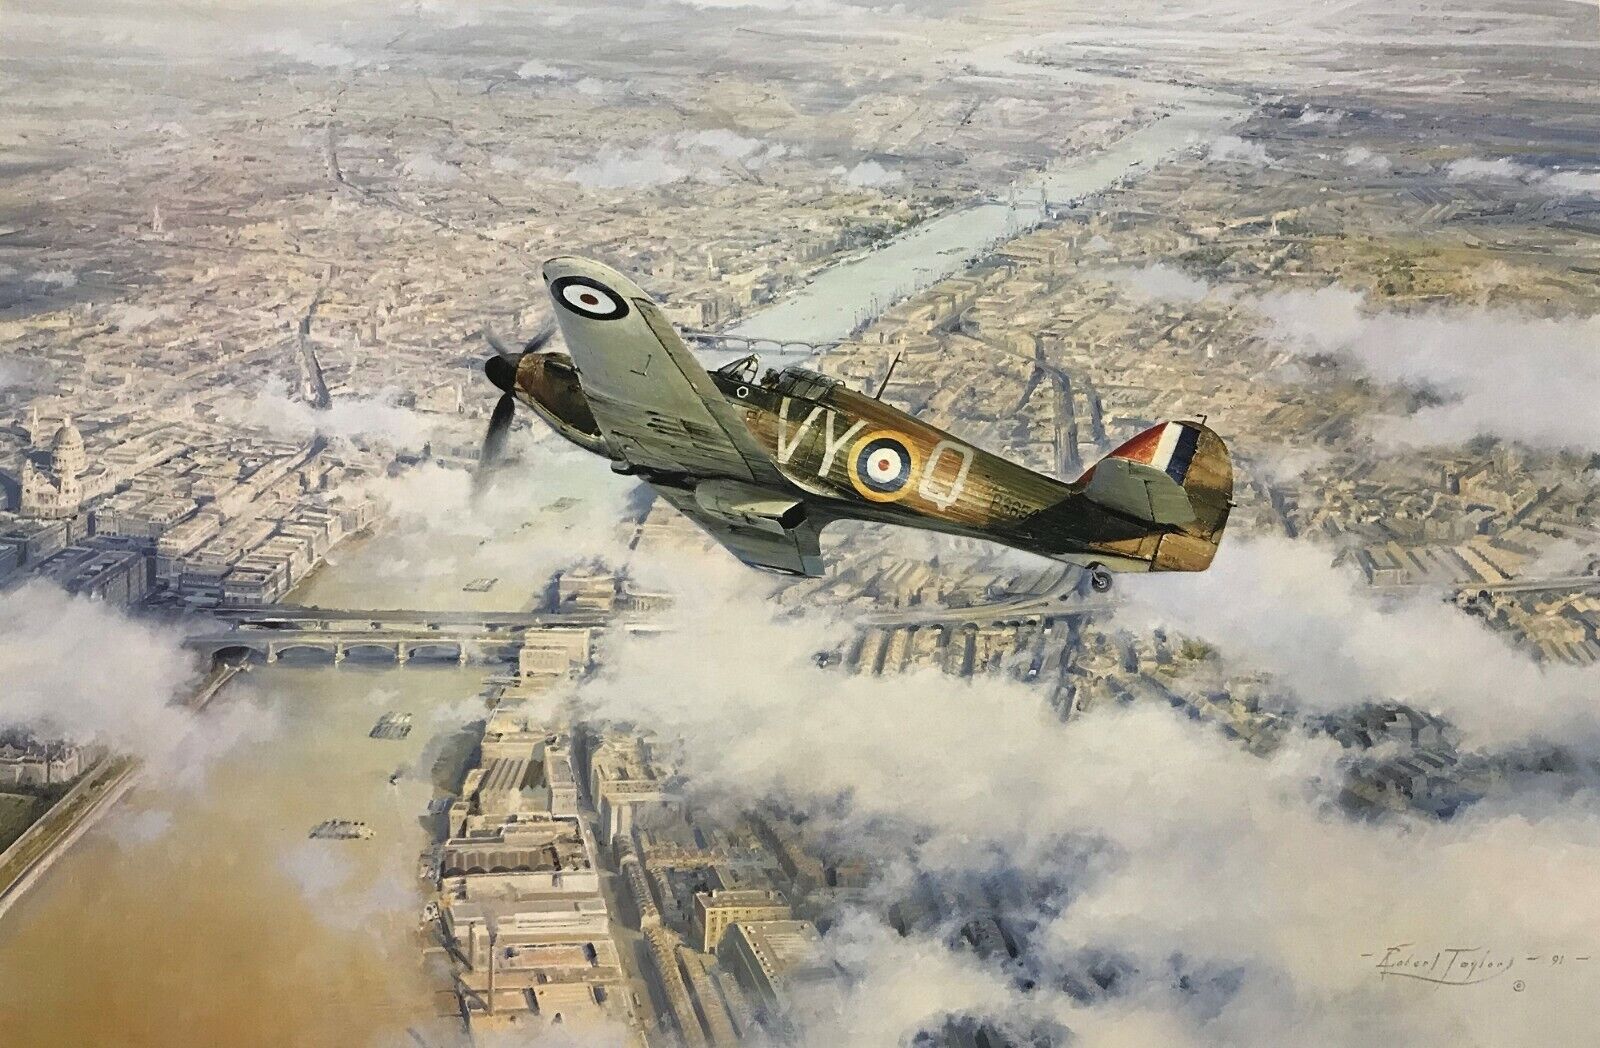 Defence of the Realm by Robert Taylor aviation art signed by Ace Peter Townsend